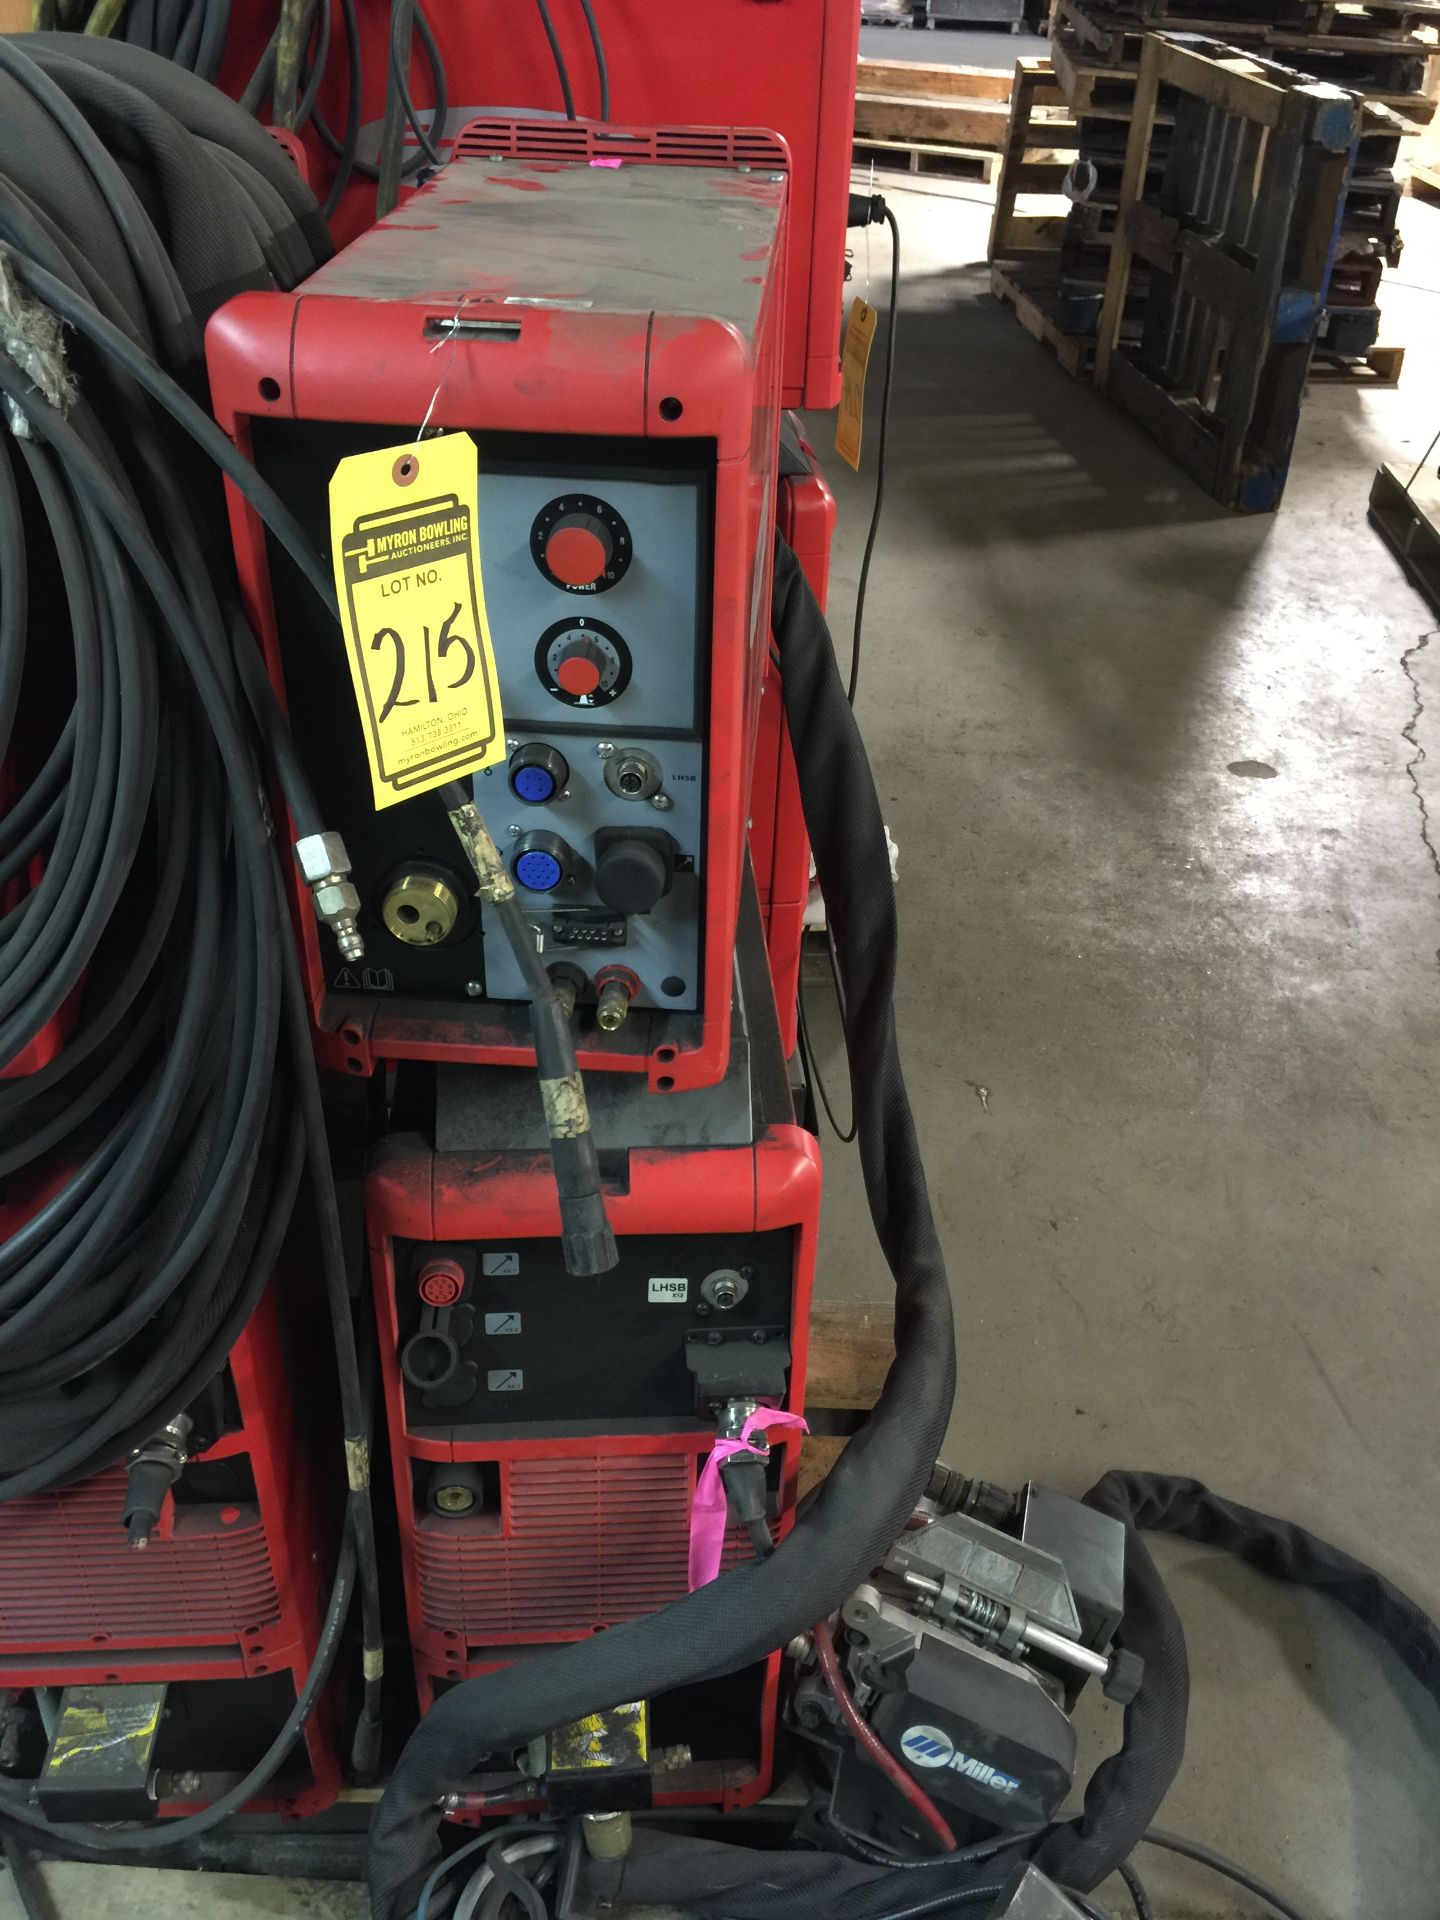 FRONIUS COLD METAL TRANSFER WELDER, S/N 19072730 (LOCATED IN SEYMOUR, IN)